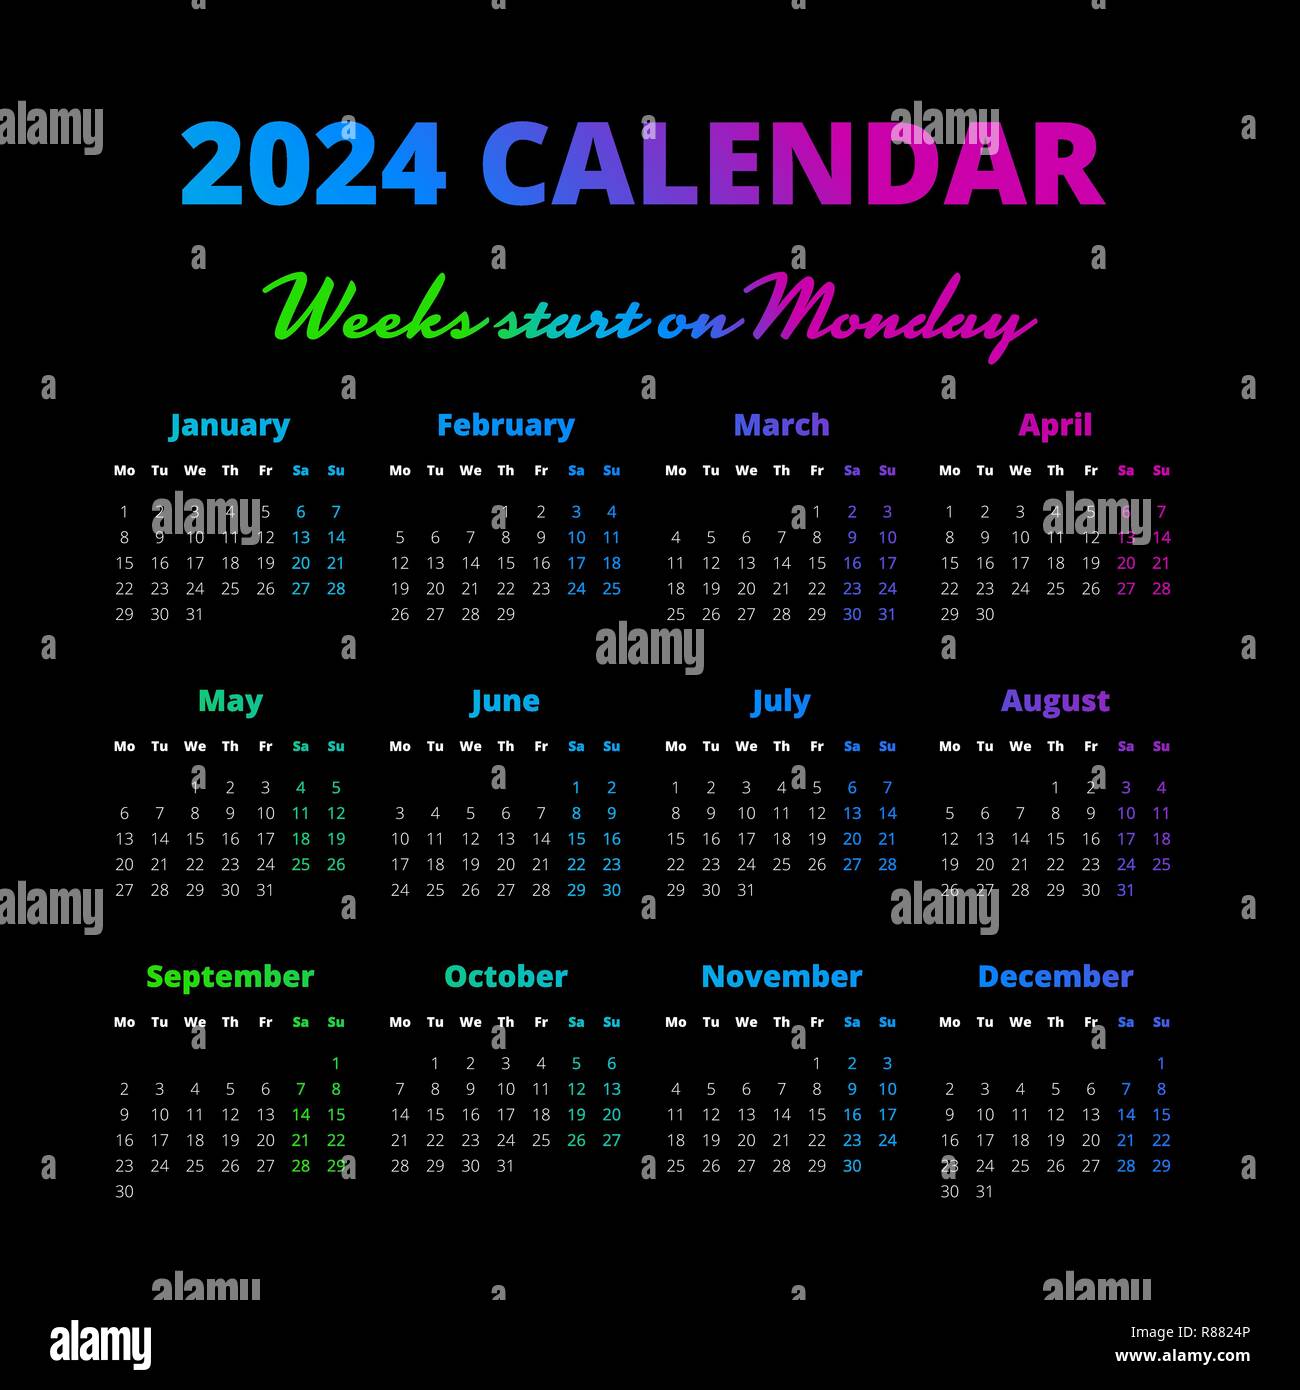 Google Calendar 2024 Download For Pc Best The Best Famous January